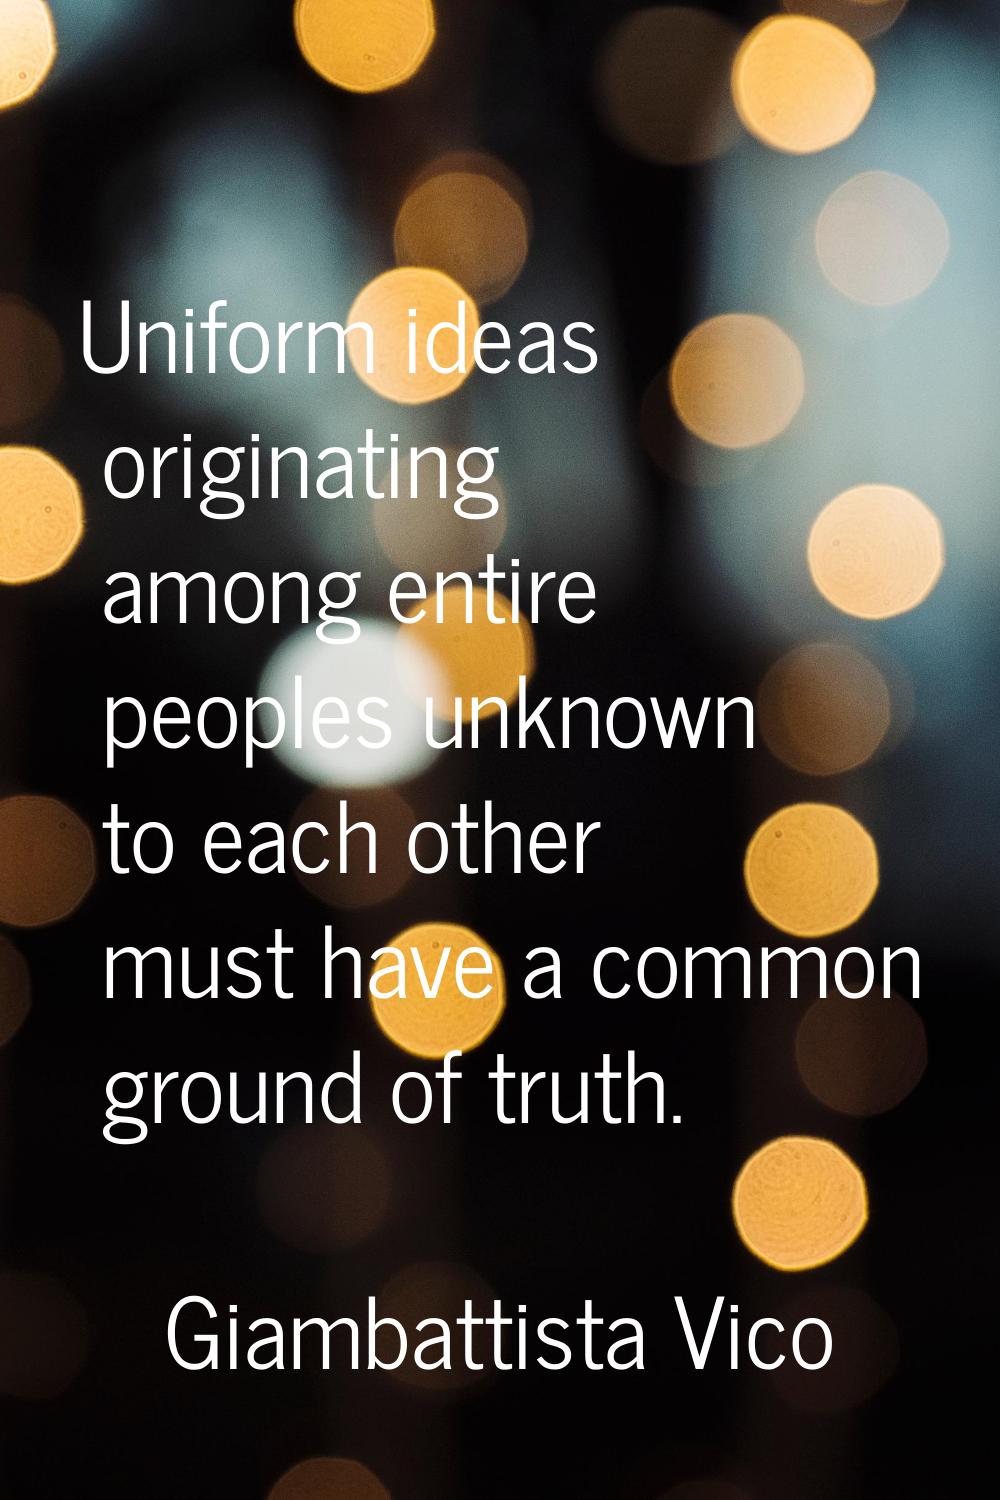 Uniform ideas originating among entire peoples unknown to each other must have a common ground of t